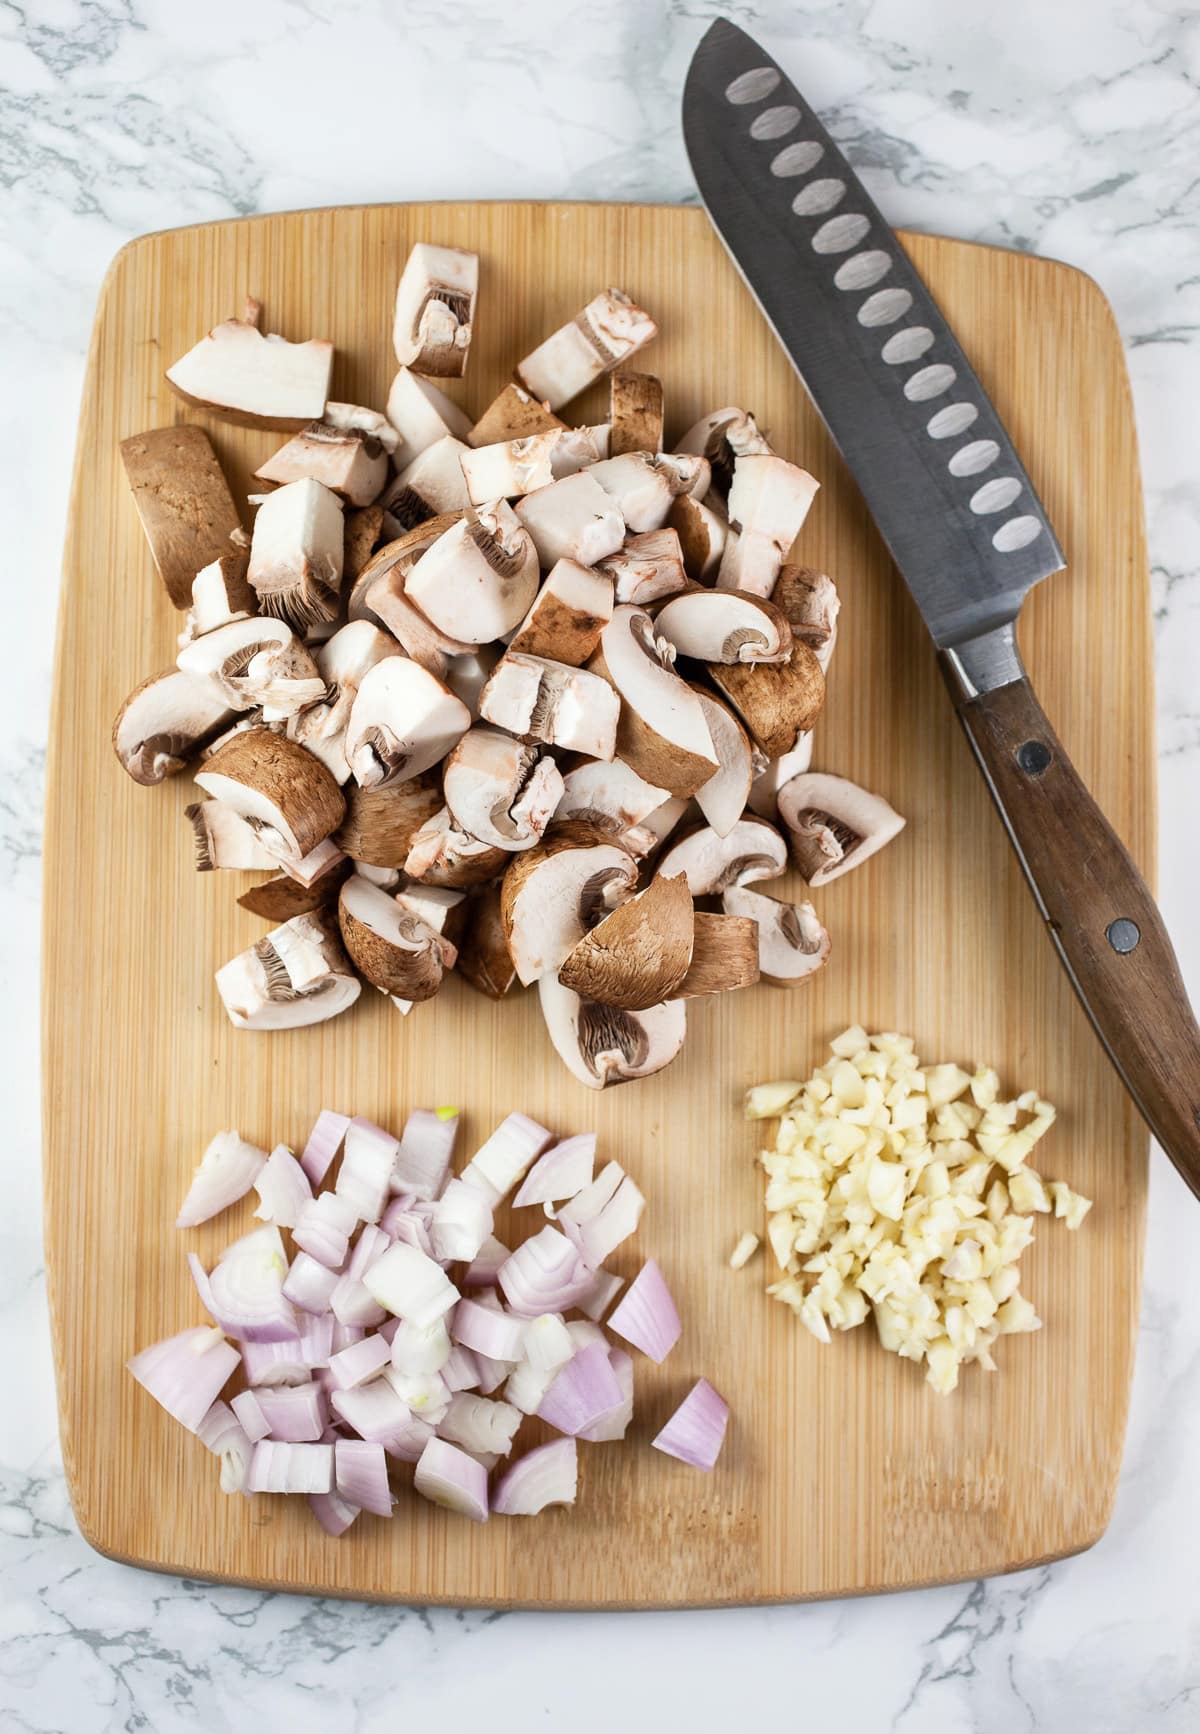 Minced garlic and shallots and diced mushrooms on wooden cutting board with knife.